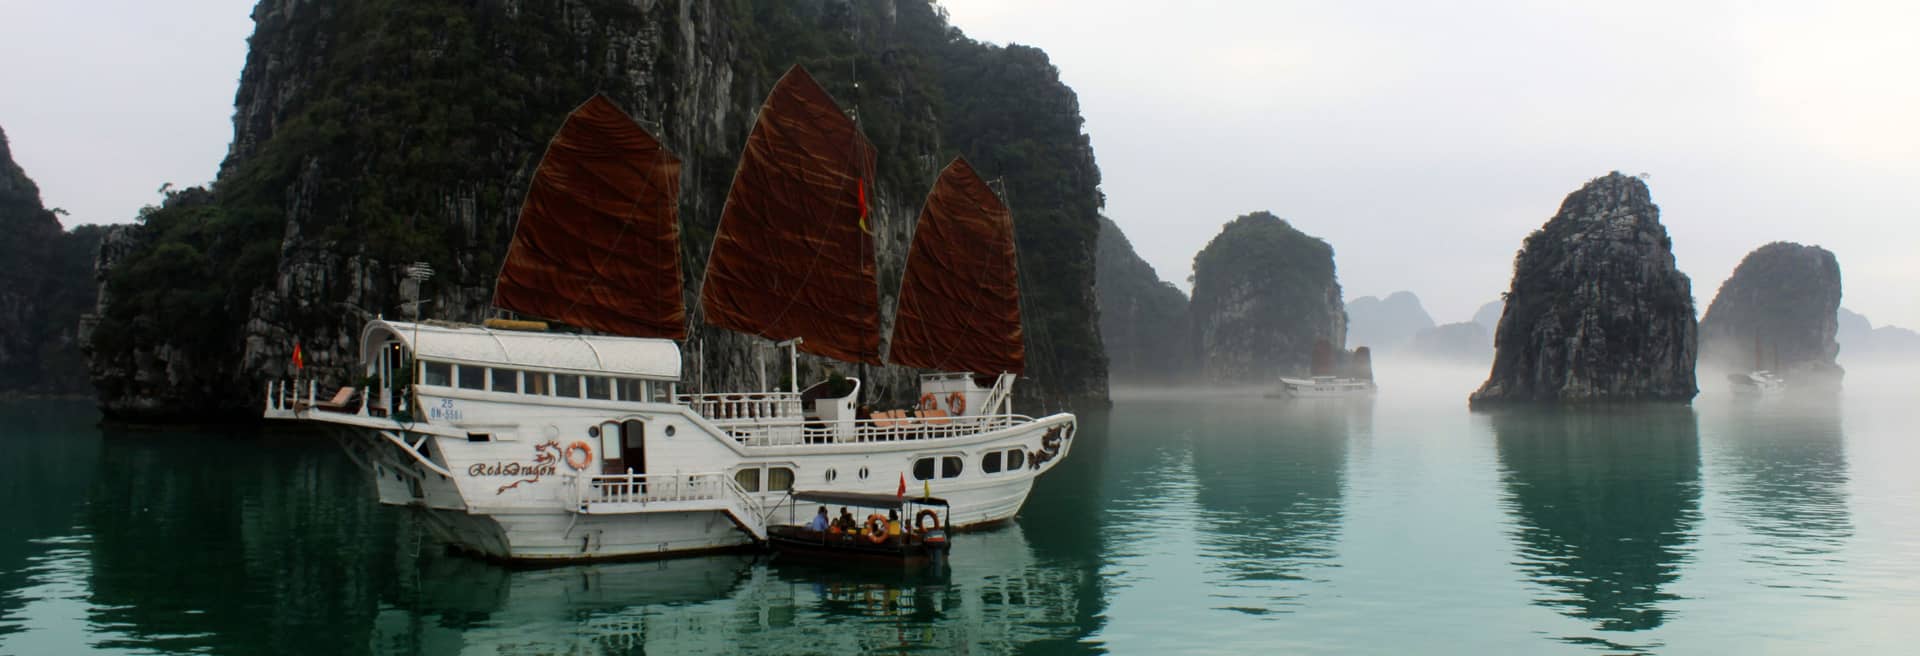 Best Time to Visit Halong Bay: When to Visit